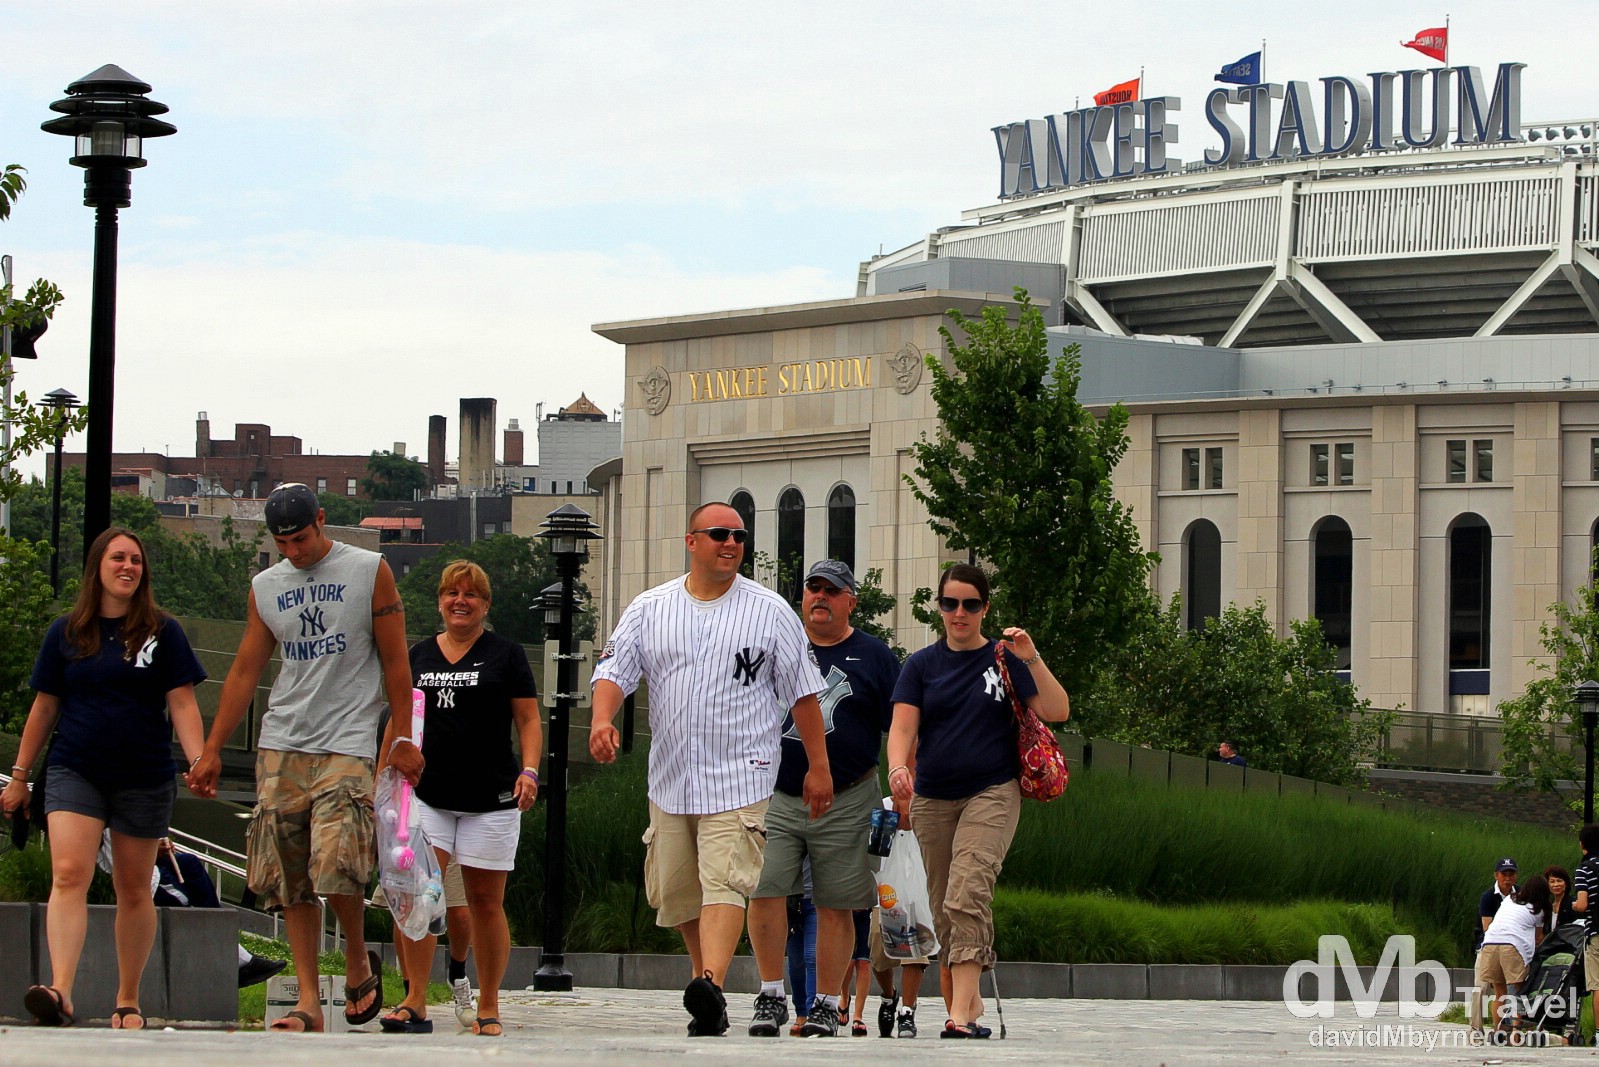 Yankee fans in Macombs Dam Park, The Bronx, New York, USA. July 13th 2013.